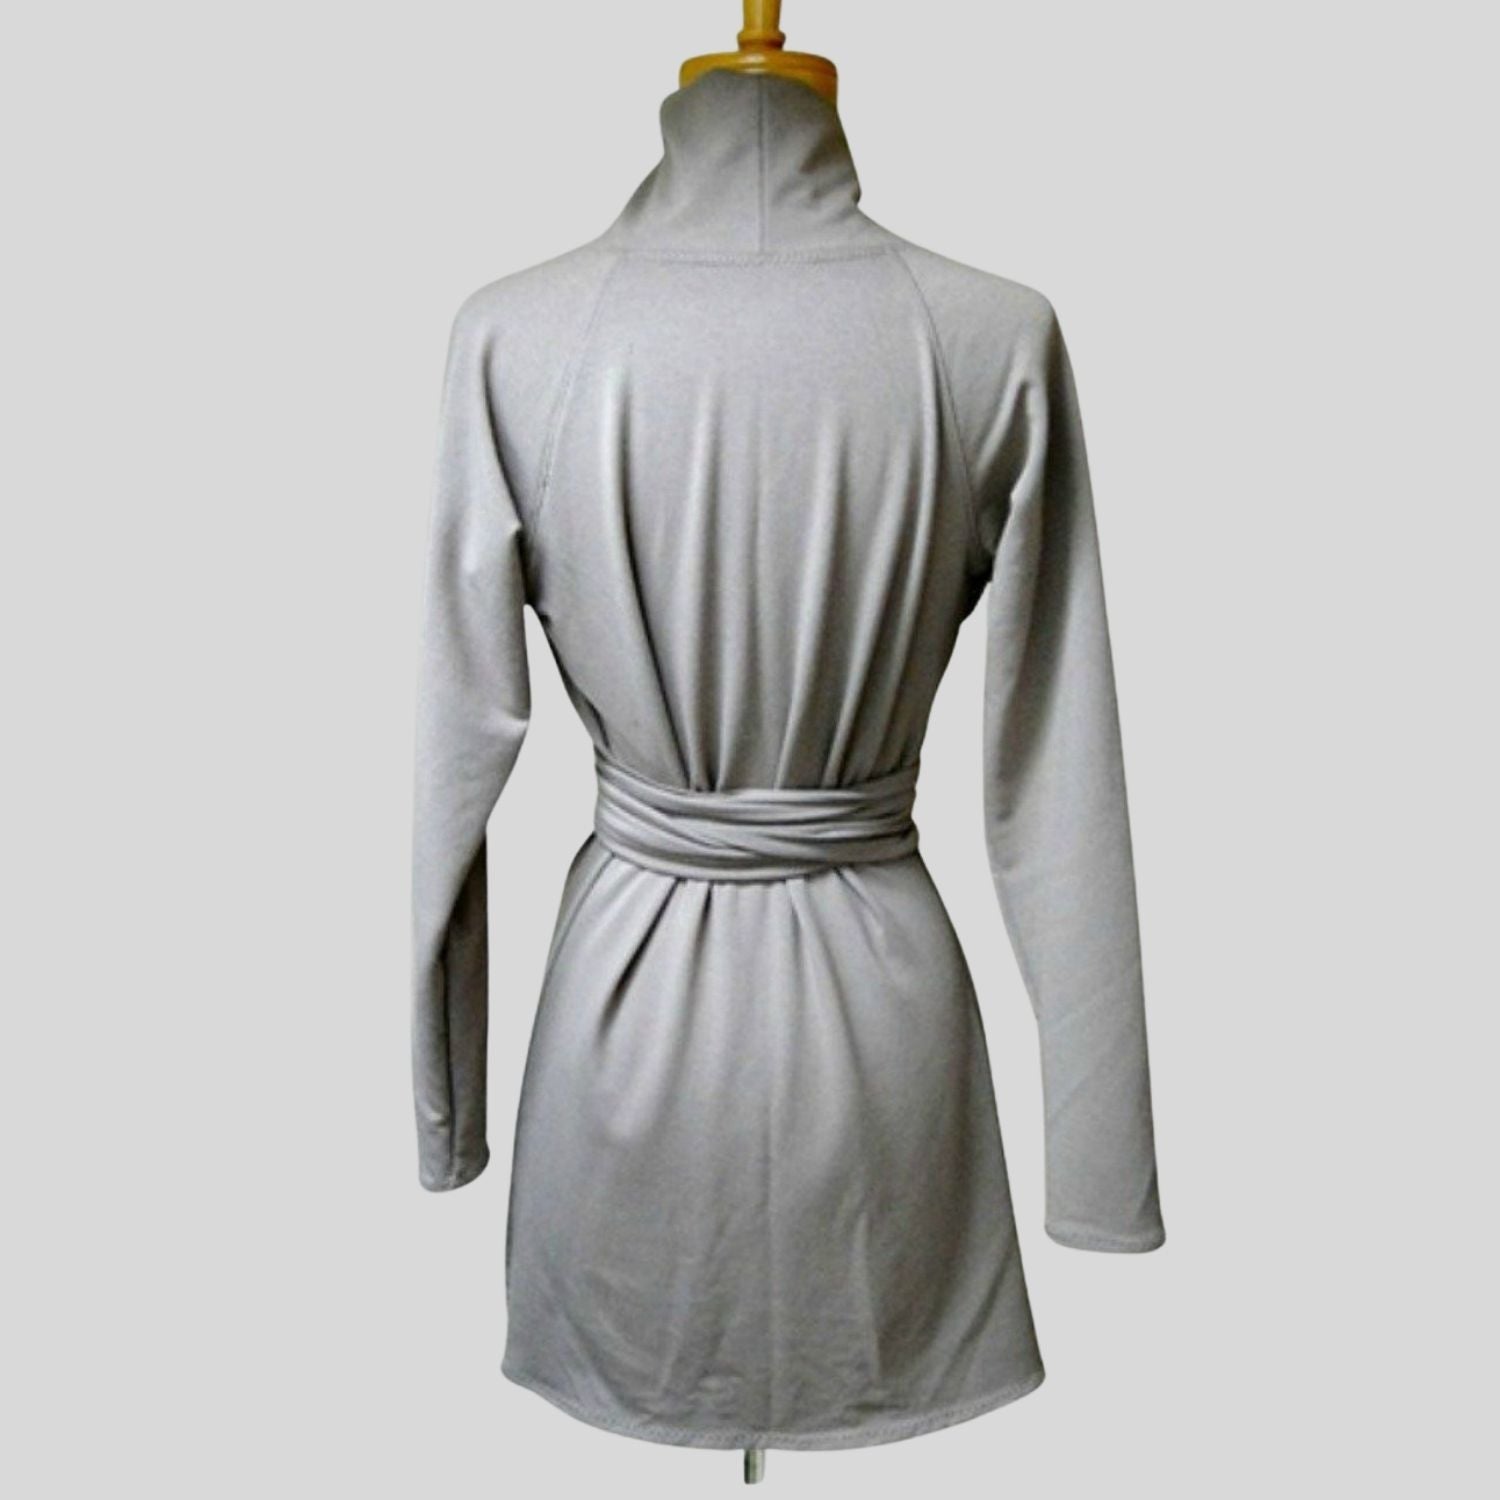 Short grey wrap dress | Shop short wrap dresses from Canada | Made in Canada organic cotton dresses for women | Econica 